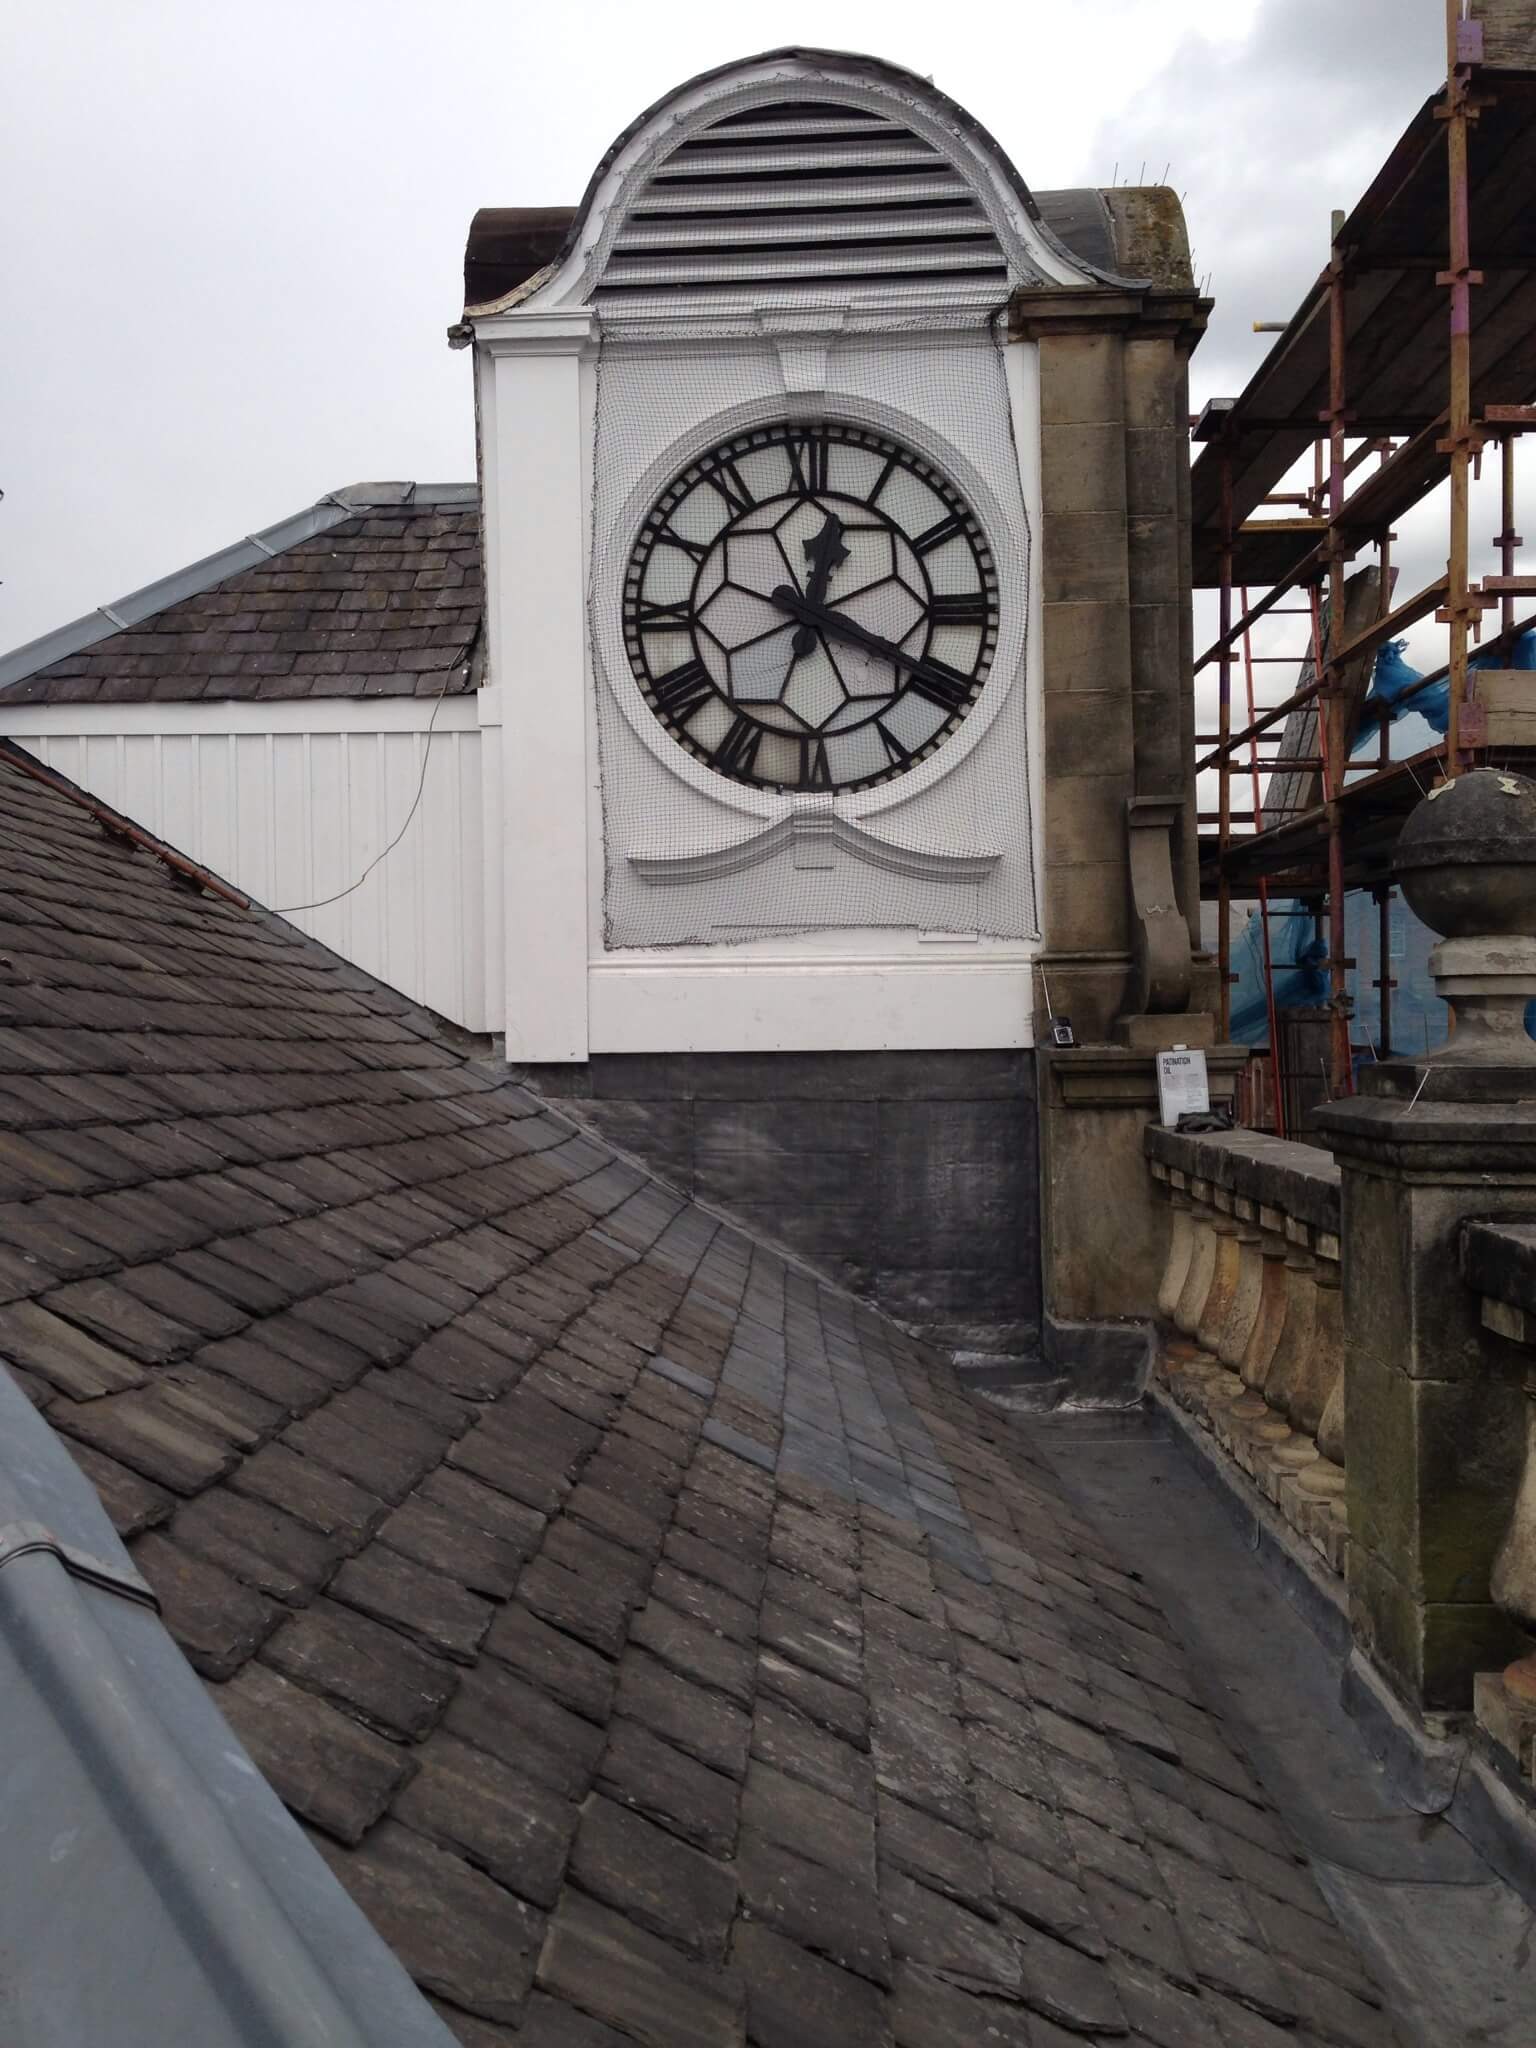 gutter and clock tower re-built Glasgow